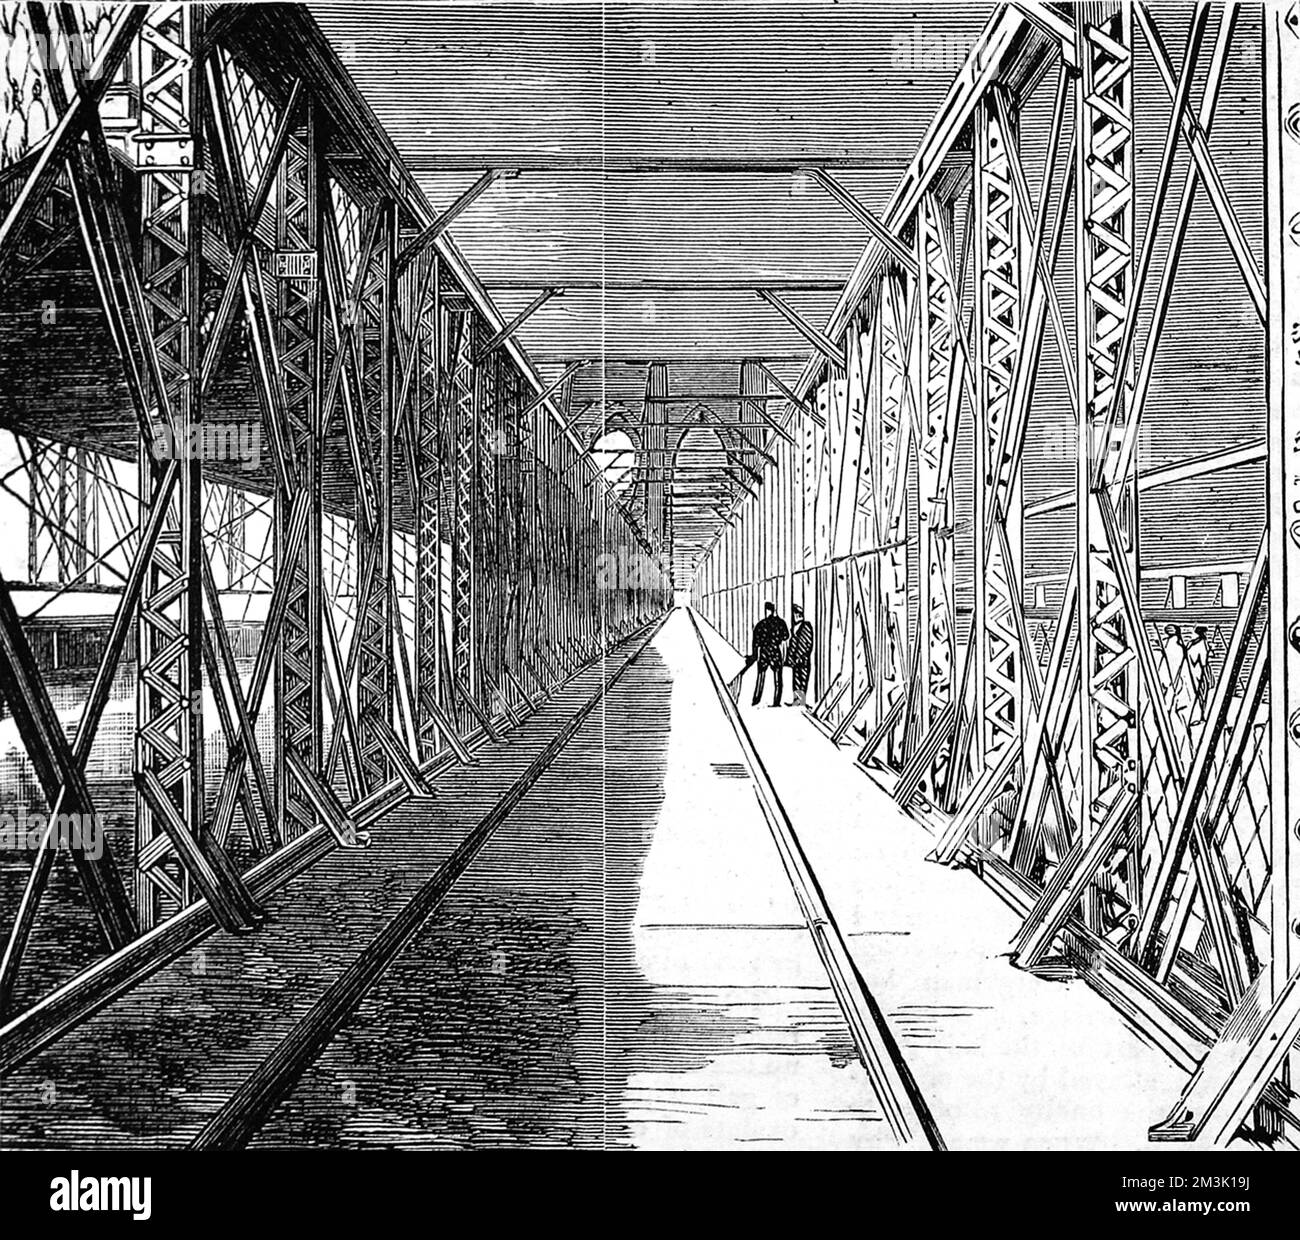 Engraving showing the railway line across the then-newly built Brooklyn Bridge, New York, 1883.     Date: 1883 Stock Photo